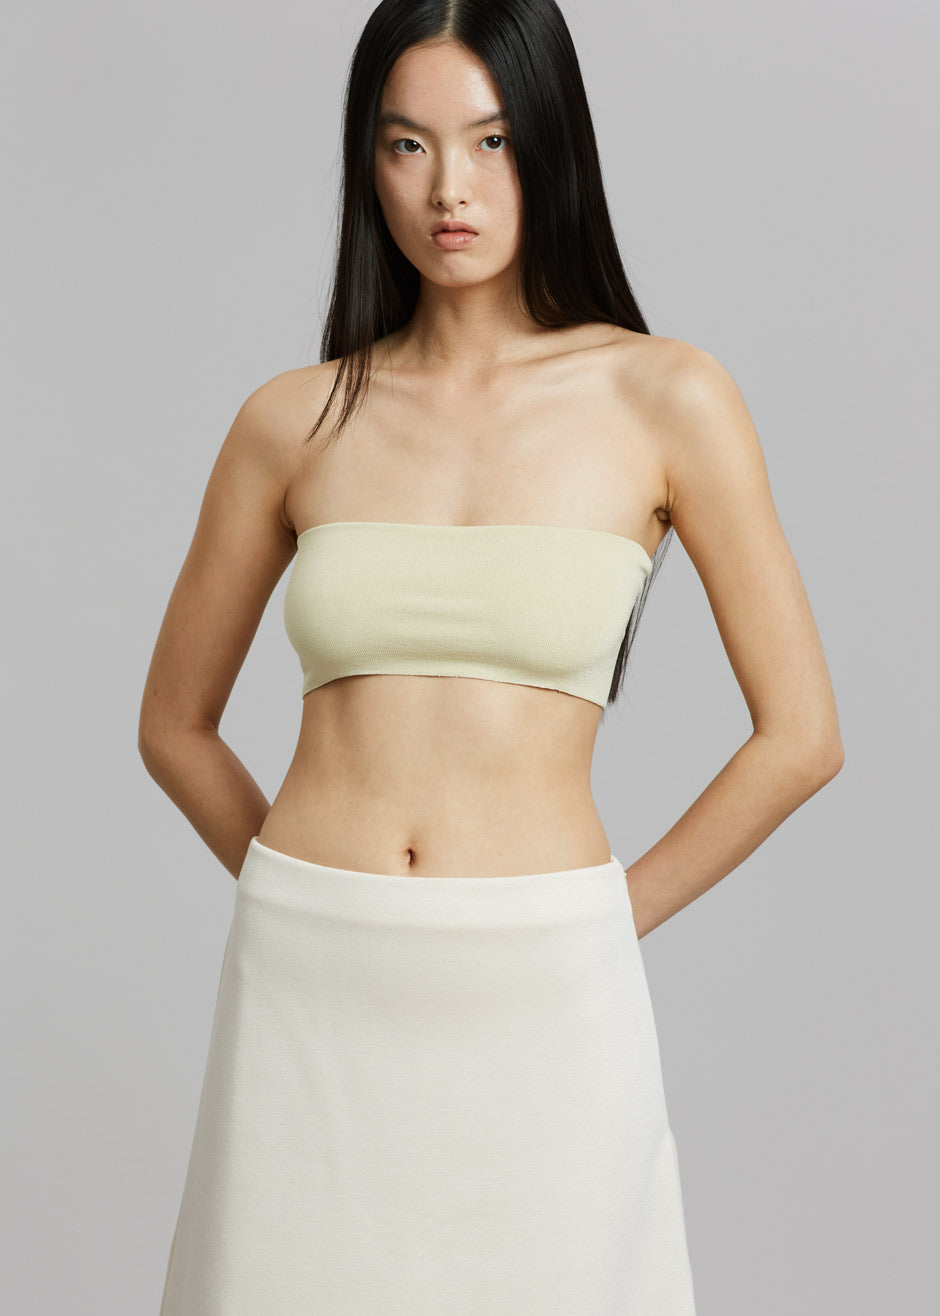 REMAIN Bailyn Tube Top - Putty Beige - 4